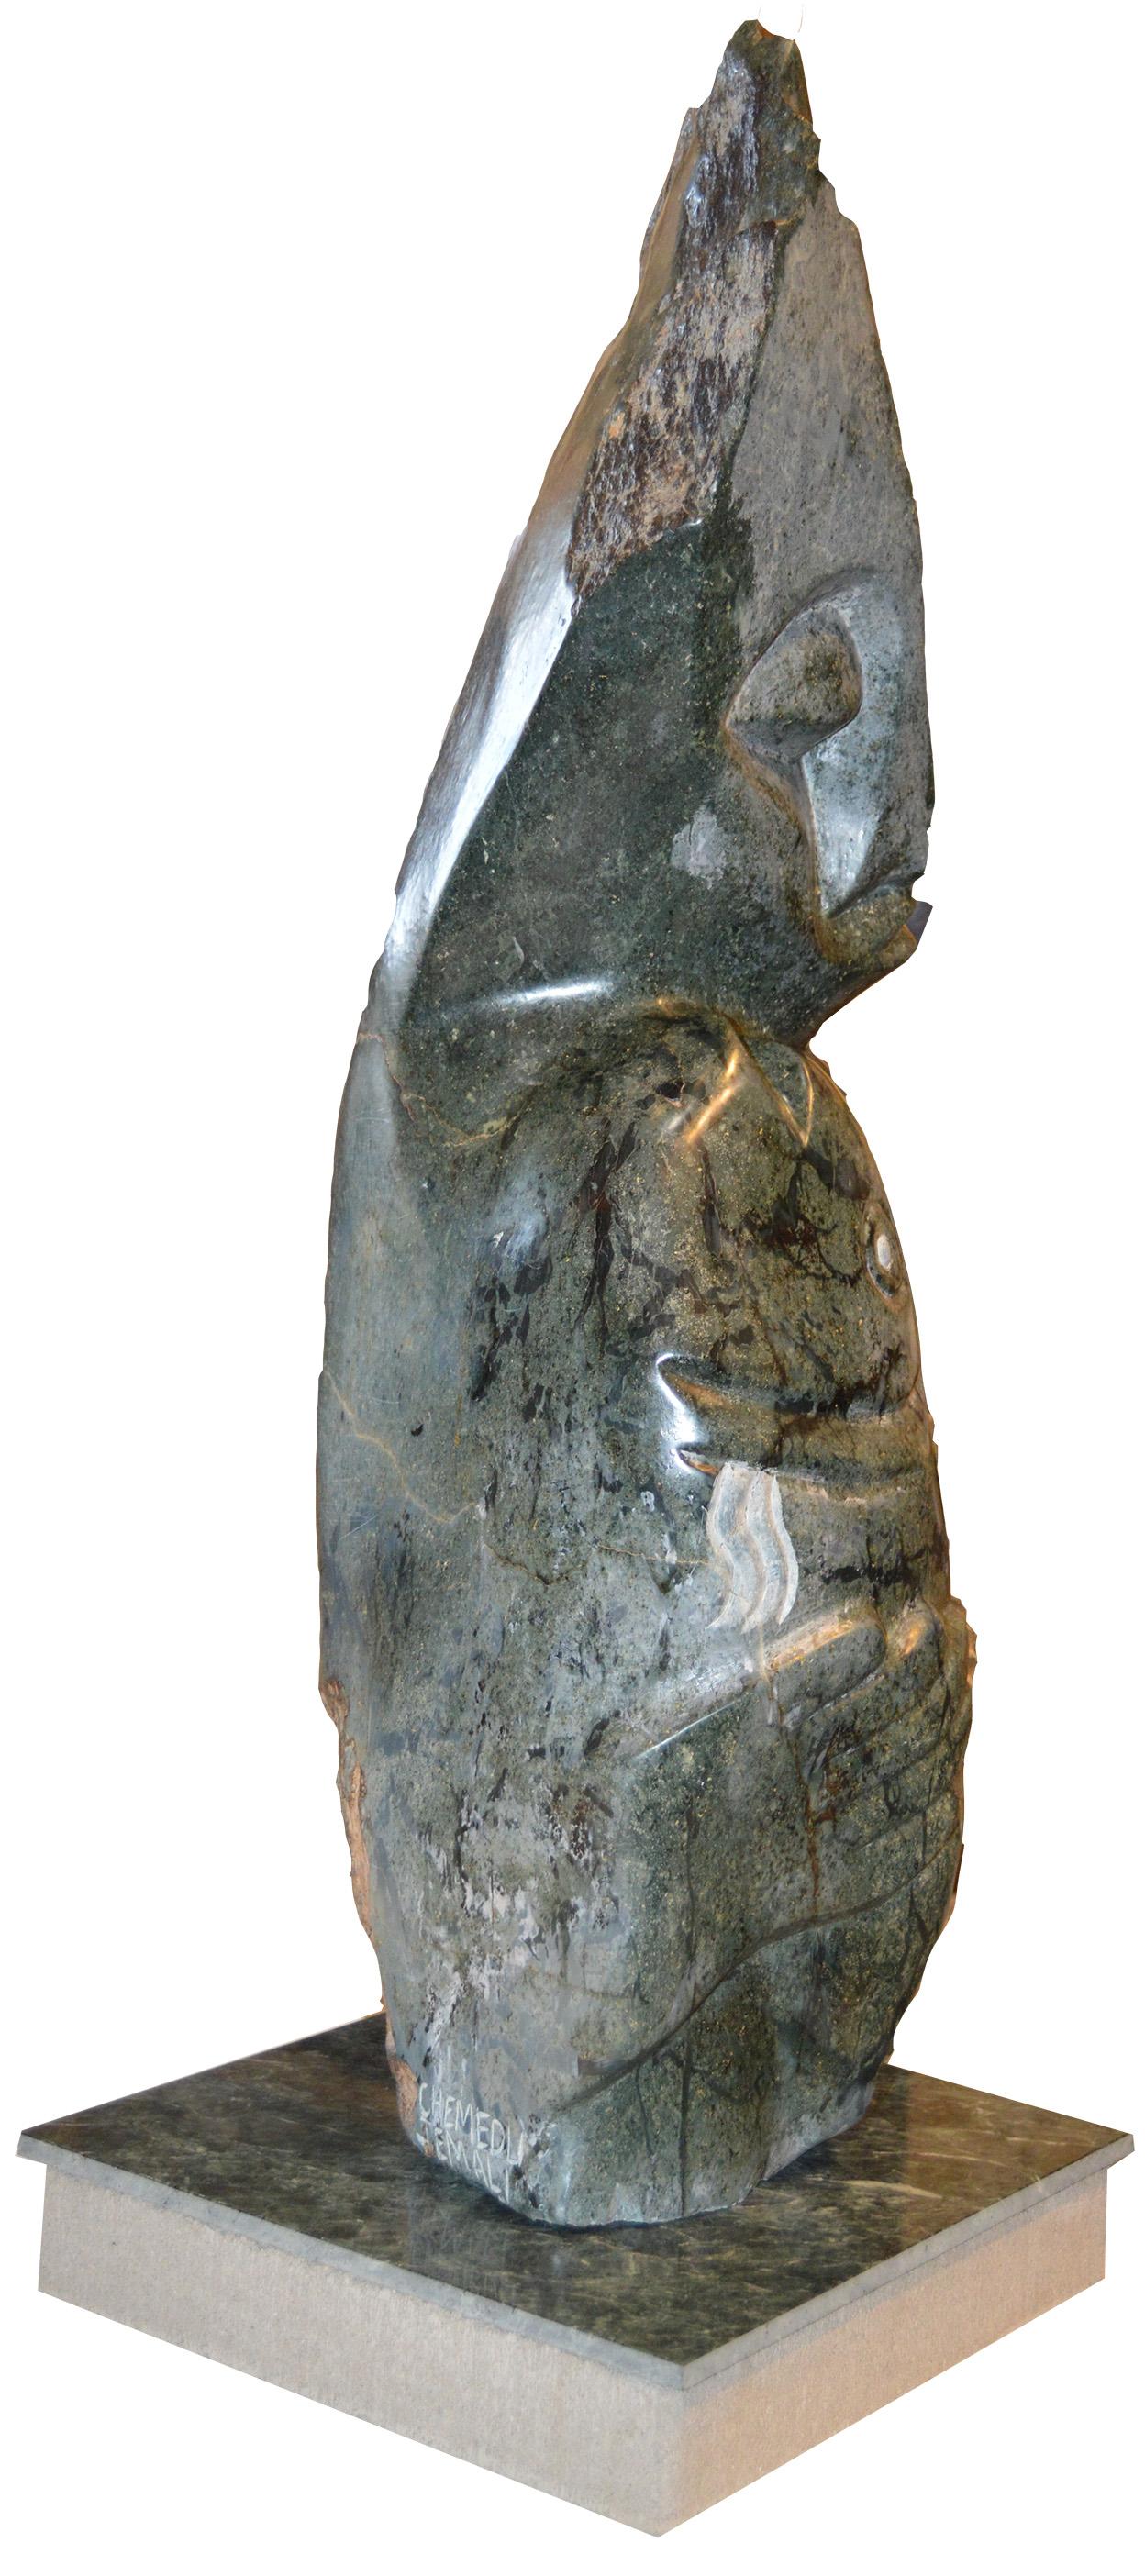 'Special Catch' is an original sculpture signed by the Zimbabwean artist Chemedu Jemali. The sculpture presents the head and torso of a figure clutching to a fish, each highly abstracted in Jemali's signature style: The figure's head leans to one